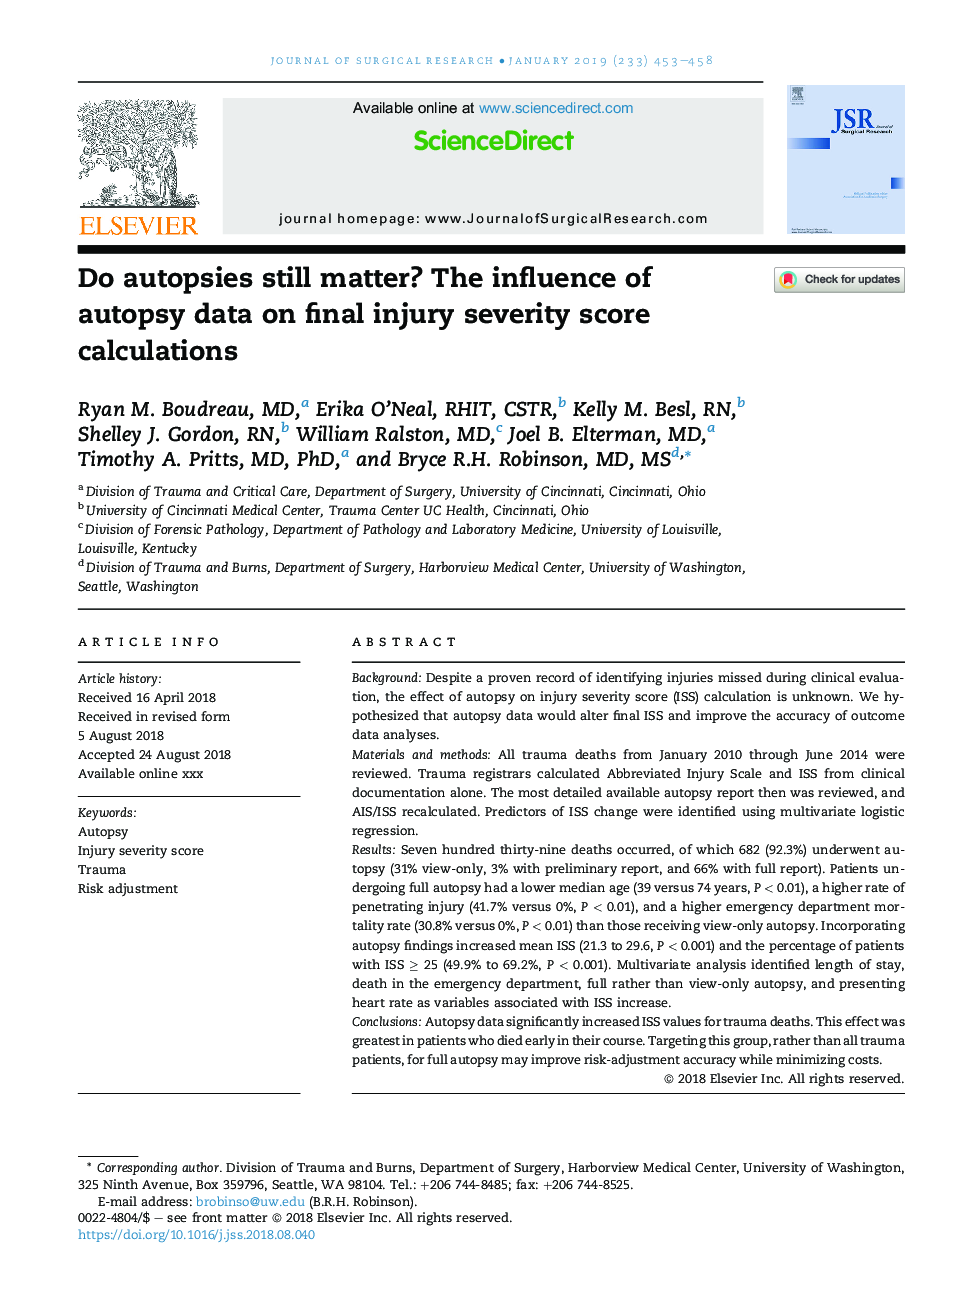 Do autopsies still matter? The influence of autopsy data on final injury severity score calculations